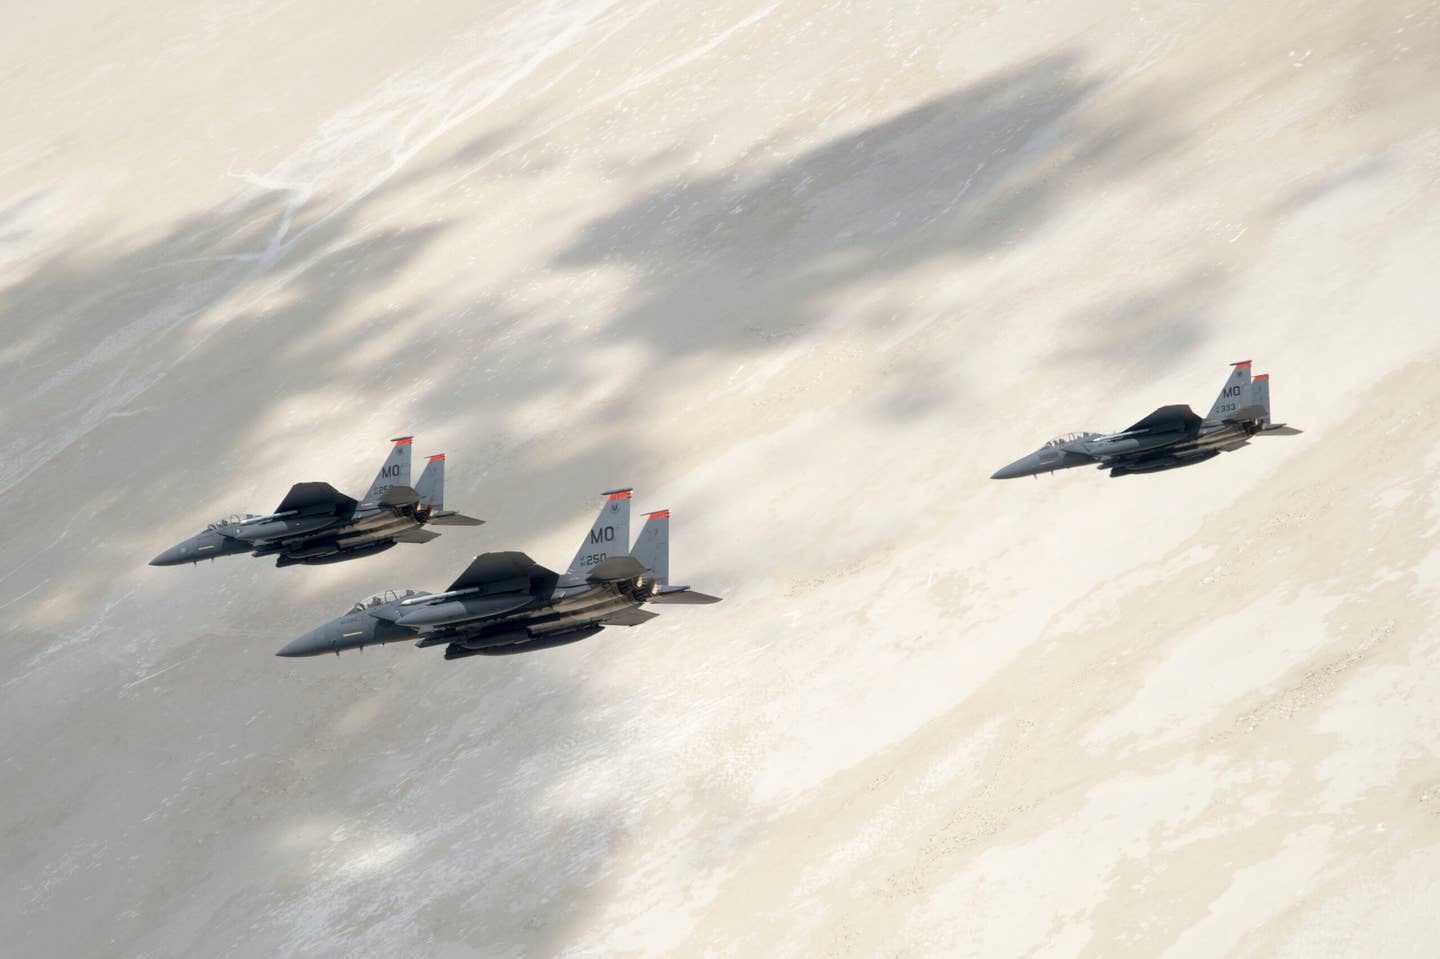 Three U.S. Air Force F-15E Strike Eagles, assigned to the 391st Fighter Squadron from Mountain Home Air Force Base, Idaho, fly over the Utah Test and Training Range, July 3, 2018. The F-15E Strike Eagle is a dual-role fighter designed to perform air-to-air and air-to-ground missions. (U.S. Air Force photo by Airman 1st Class Codie Trimble)